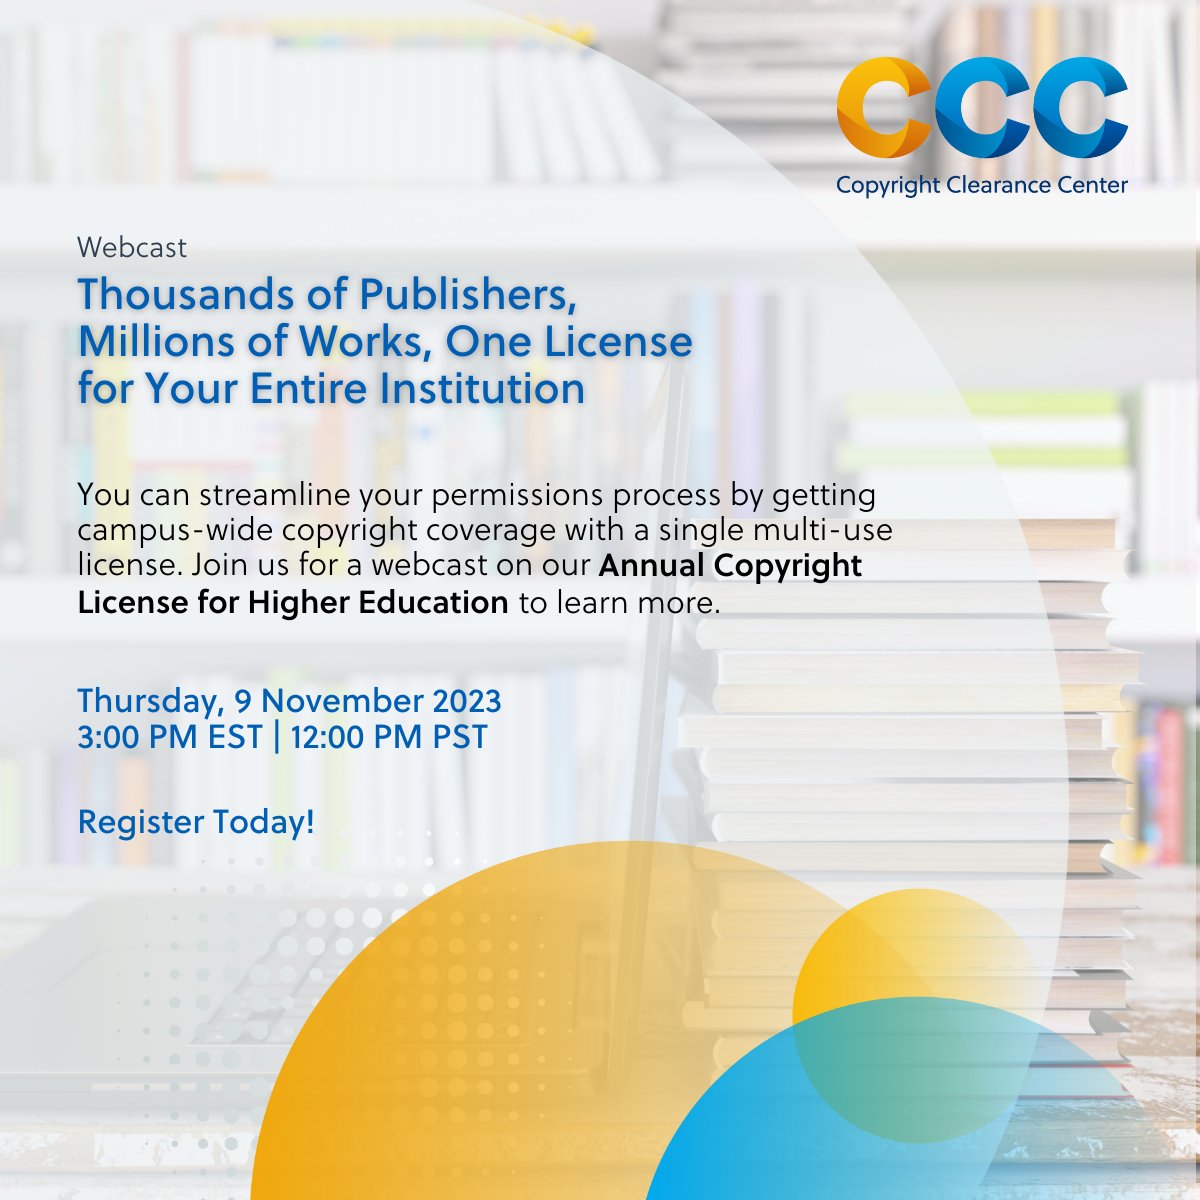 Join @copyrightclear tomorrow to learn how to streamline your #permissions process and #campus-wide #copyright coverage with a single multi-use license for #HigherEducation. Register now: copyright.com/landing/9-nove…